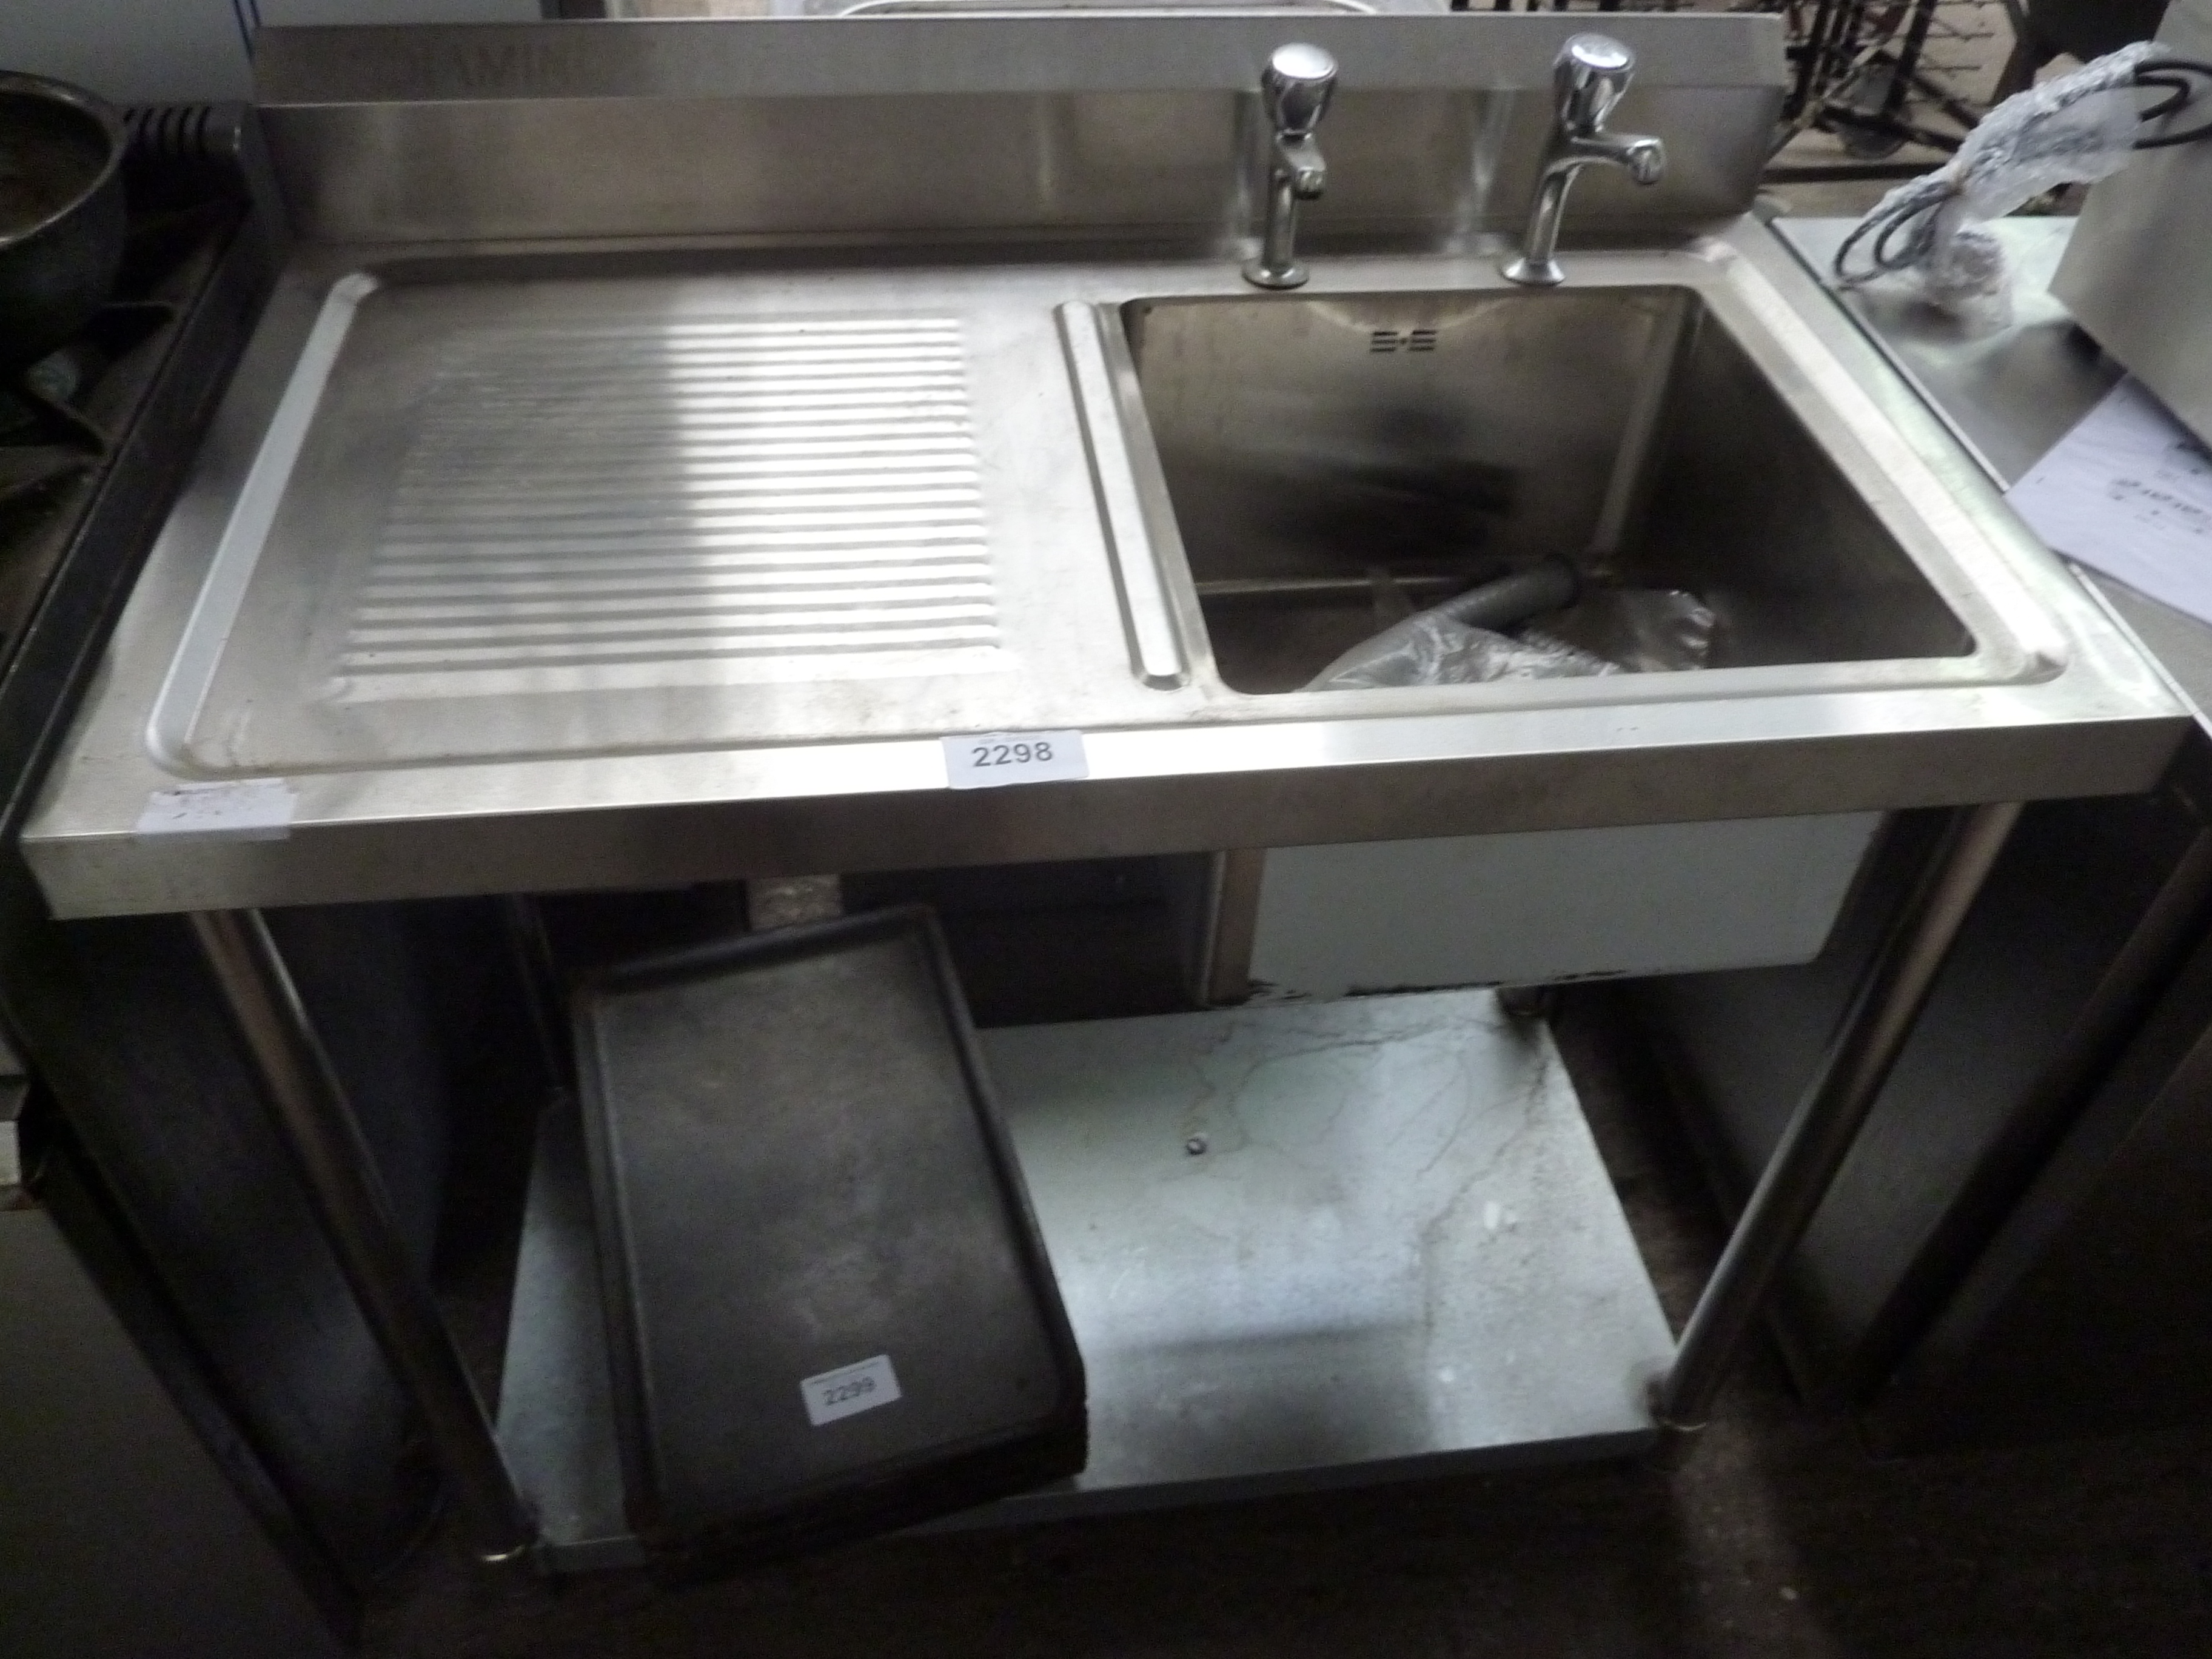 New Diaminox single bowl, single drainer sink with taps